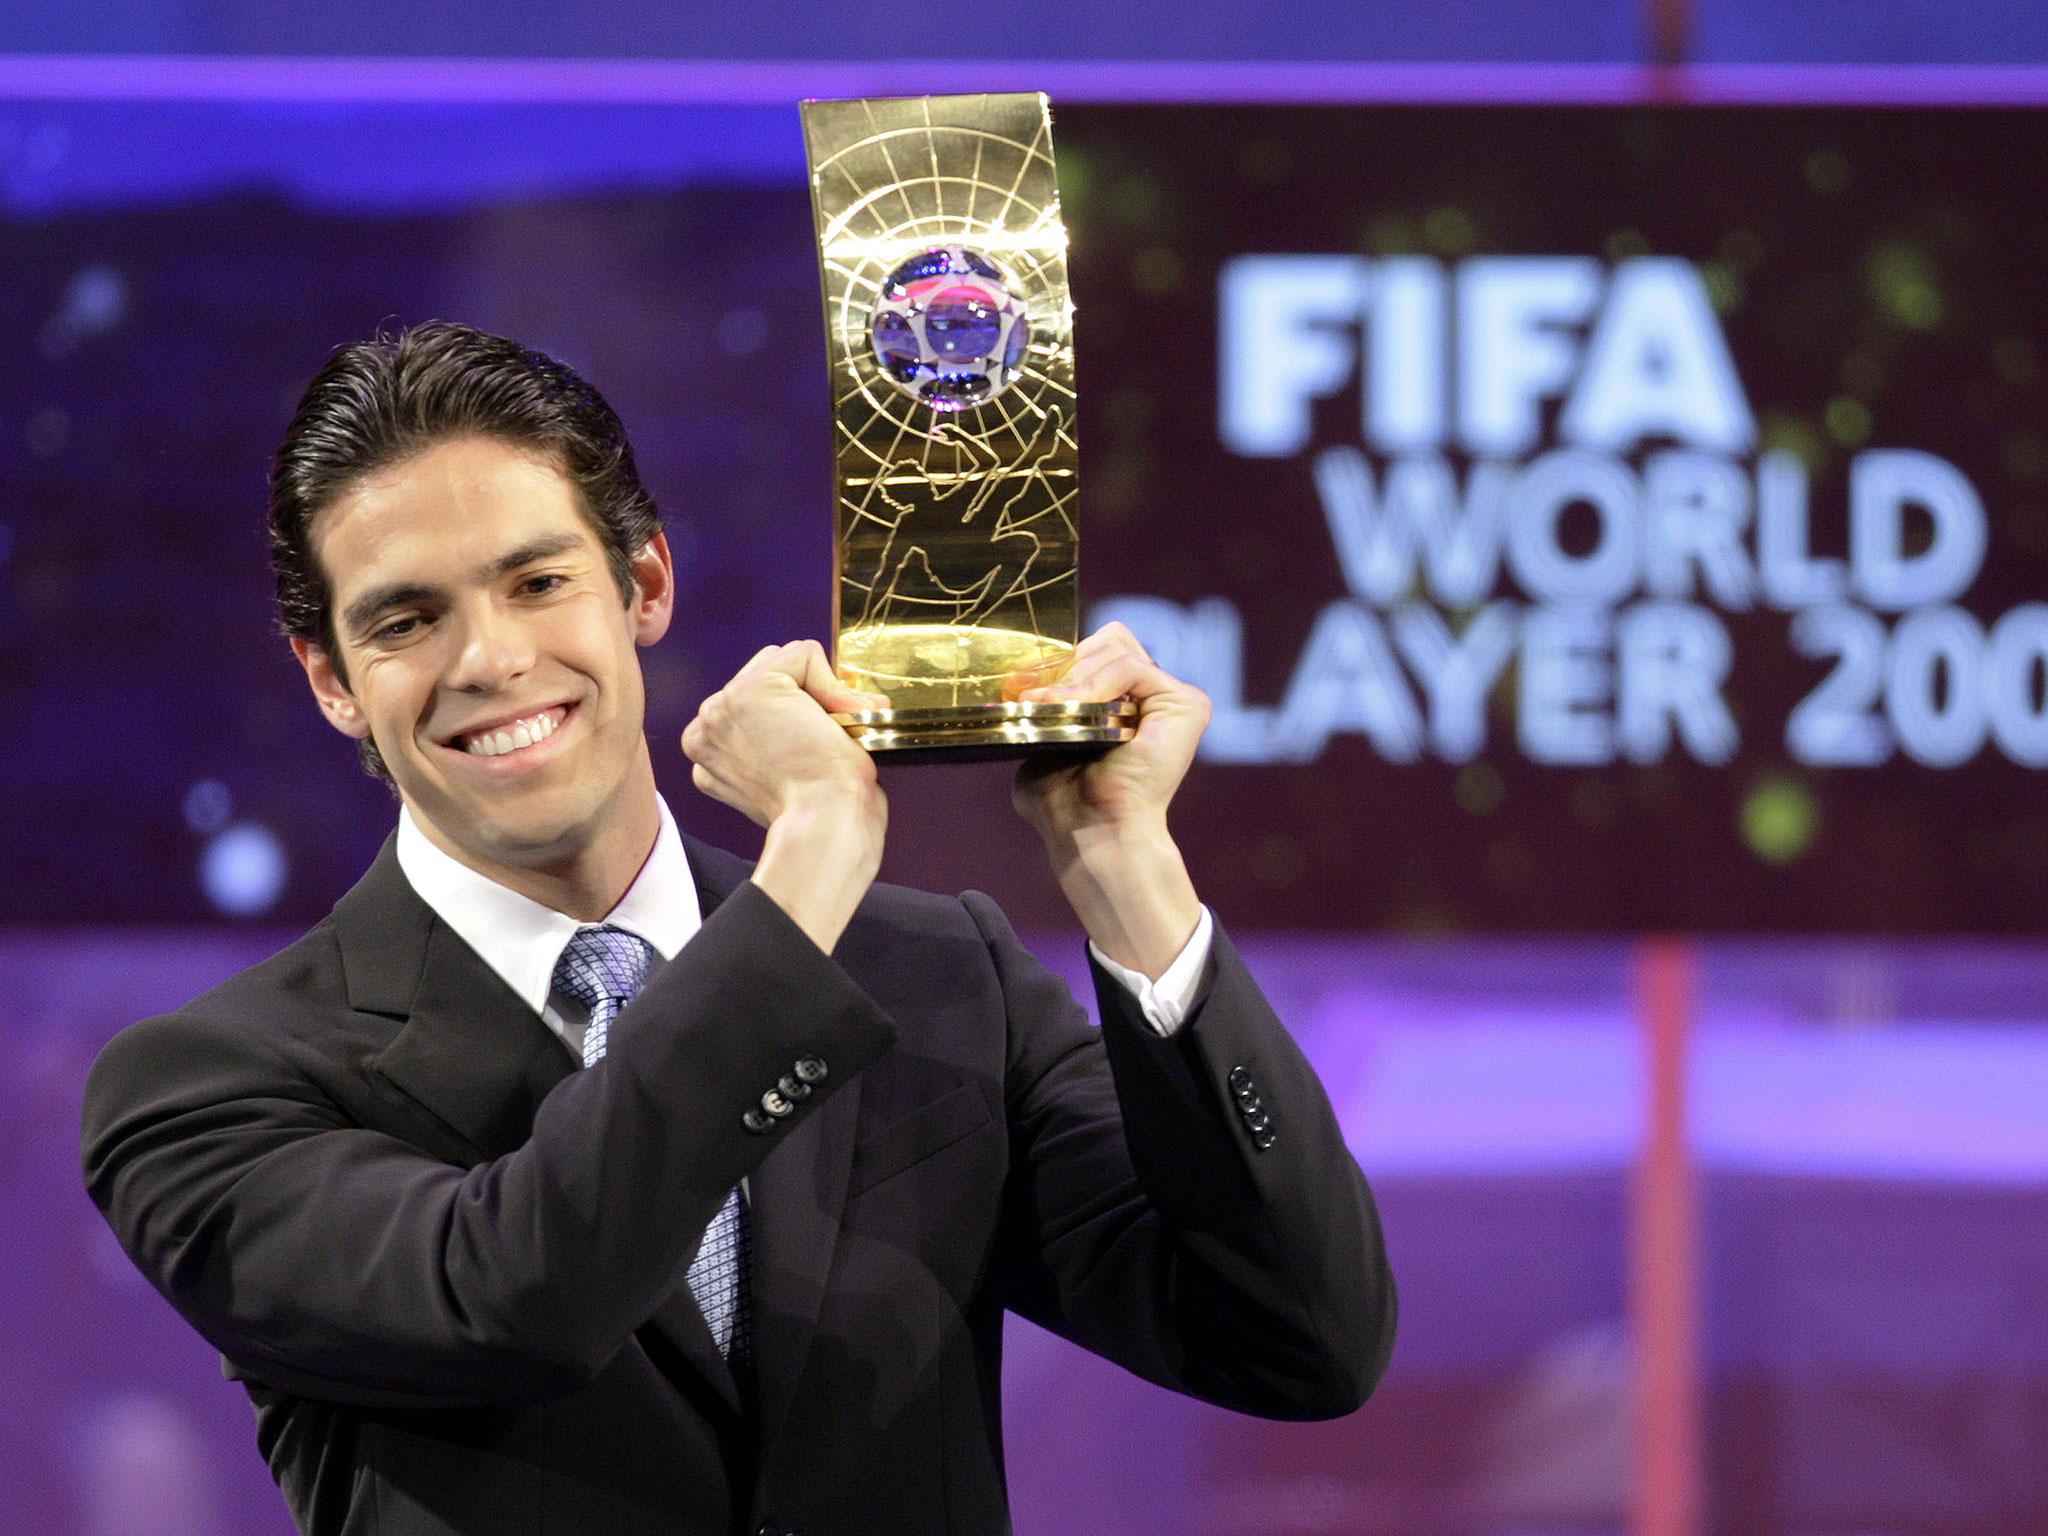 Kaka won the Ballon d'Or in 2007 but could never reach those heights again